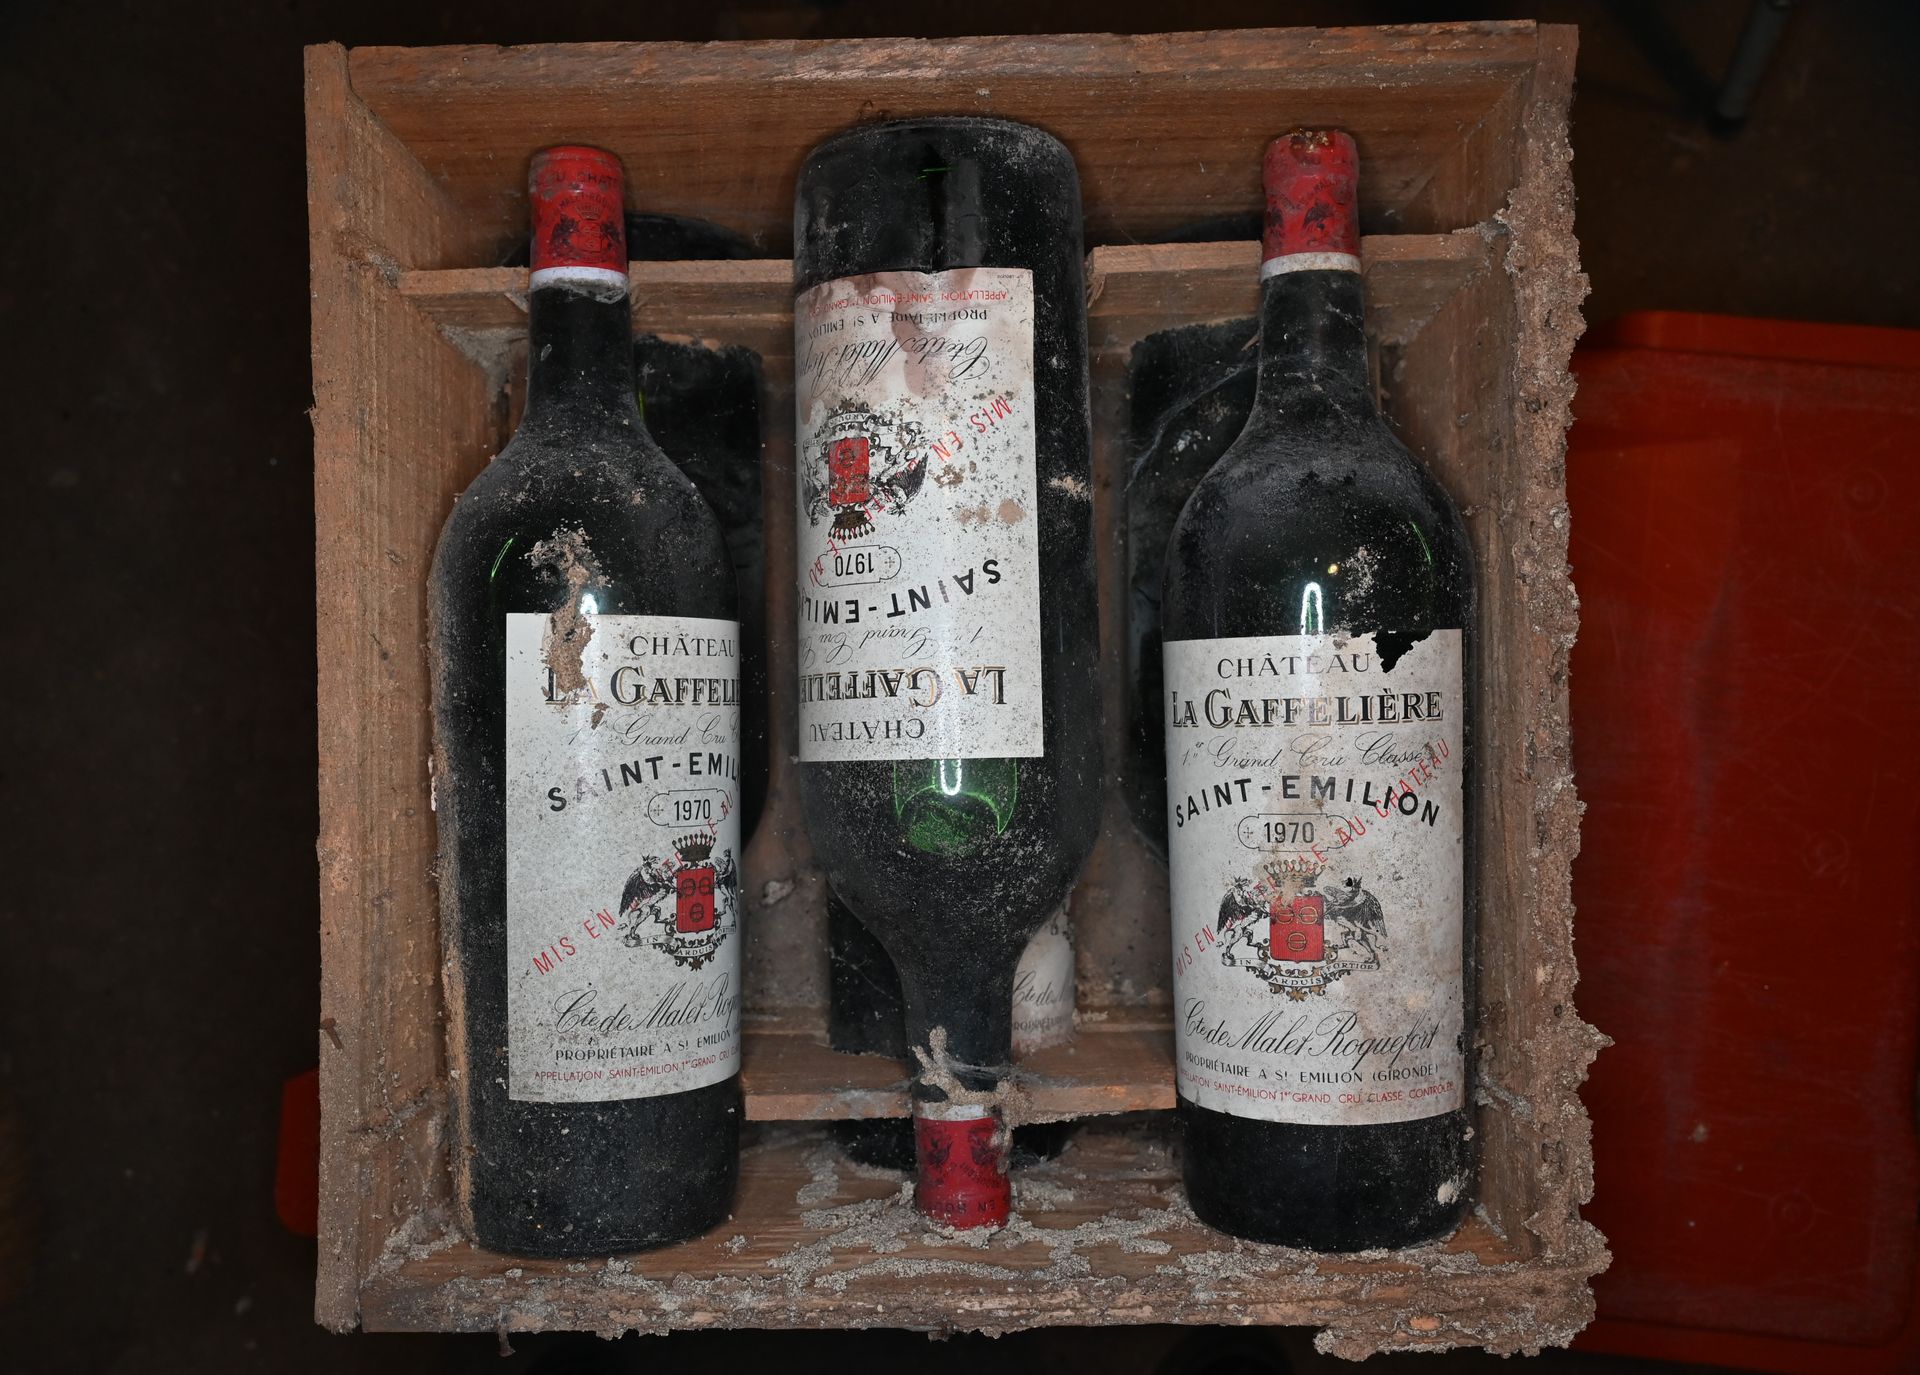 Null 1 CB 5 magnums Château La Gaffeliere St Emilion 1970.

The condition of the&hellip;